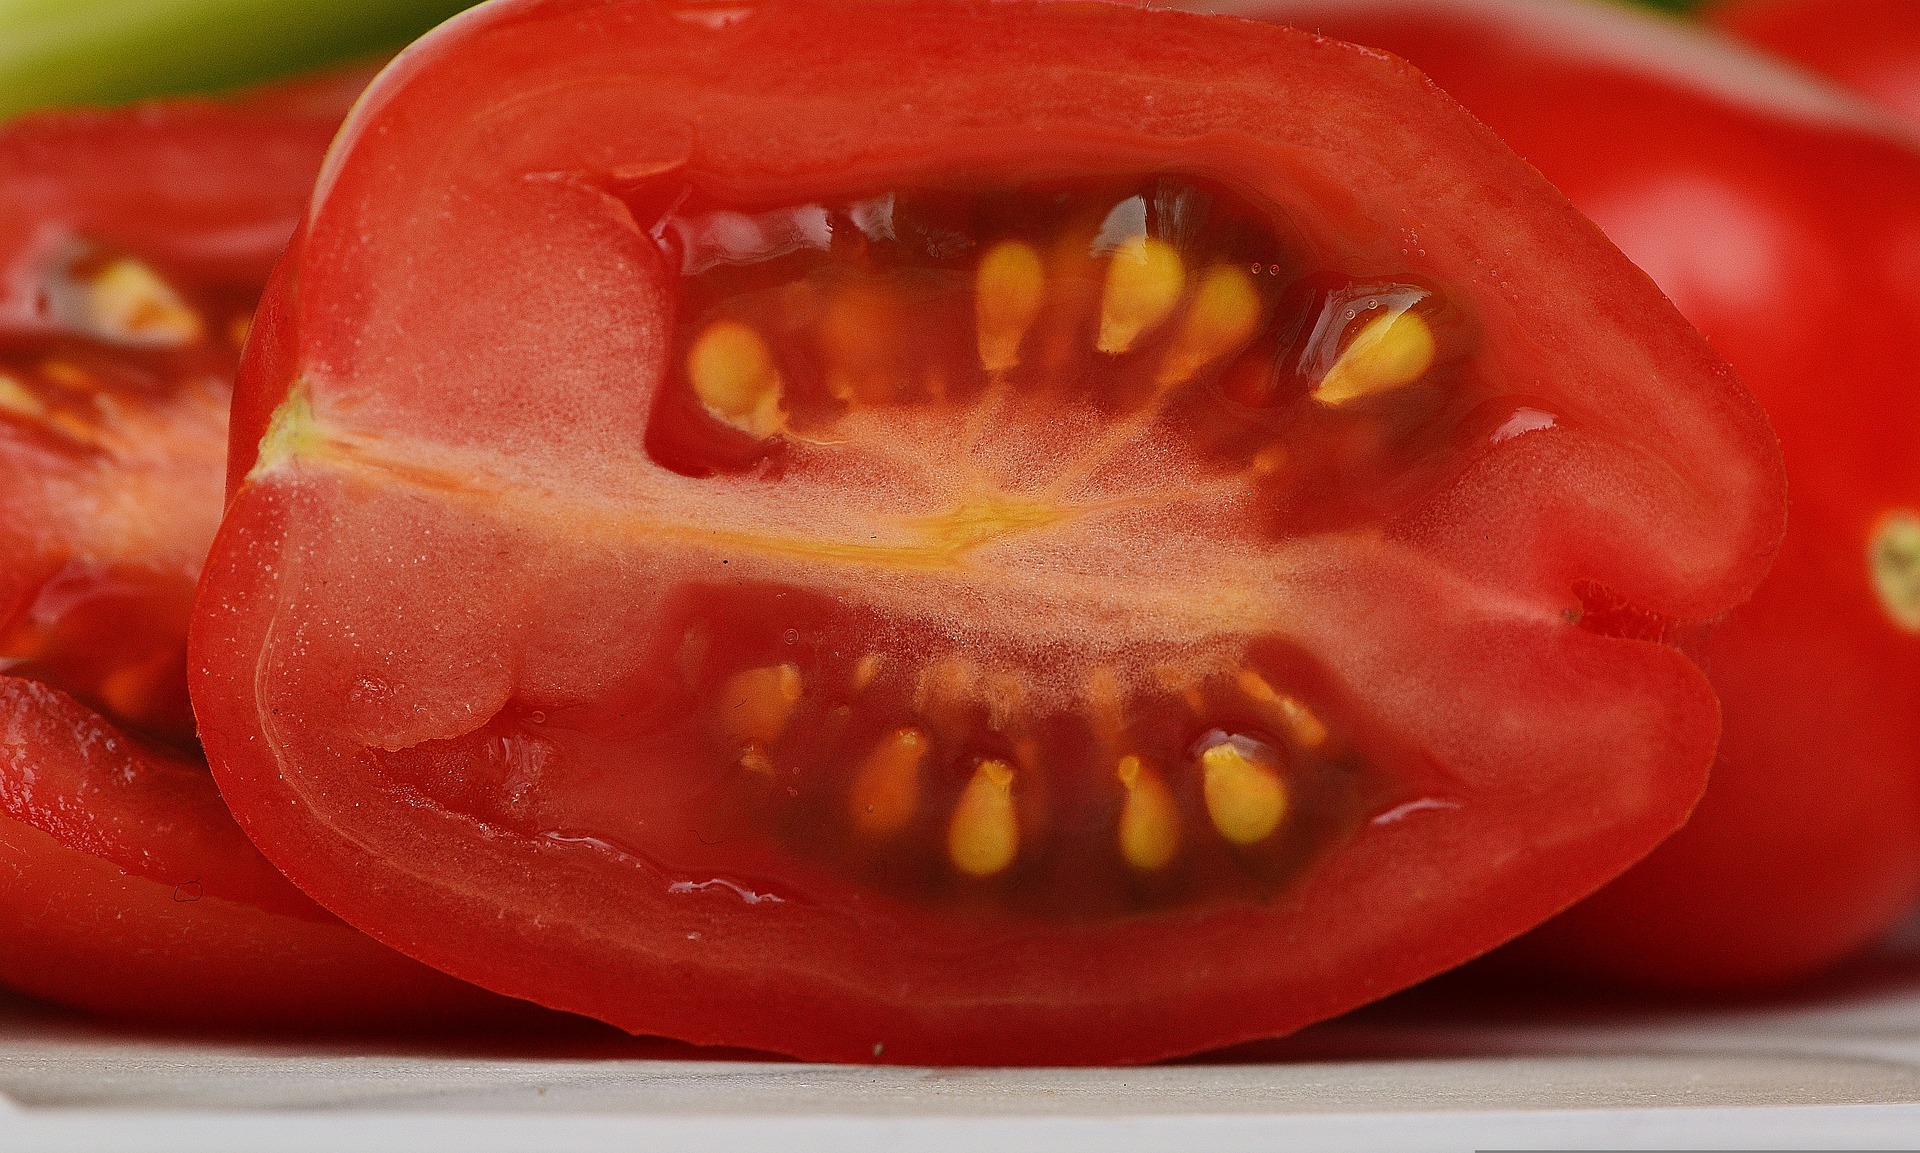 Picture of image of tomato seeds.